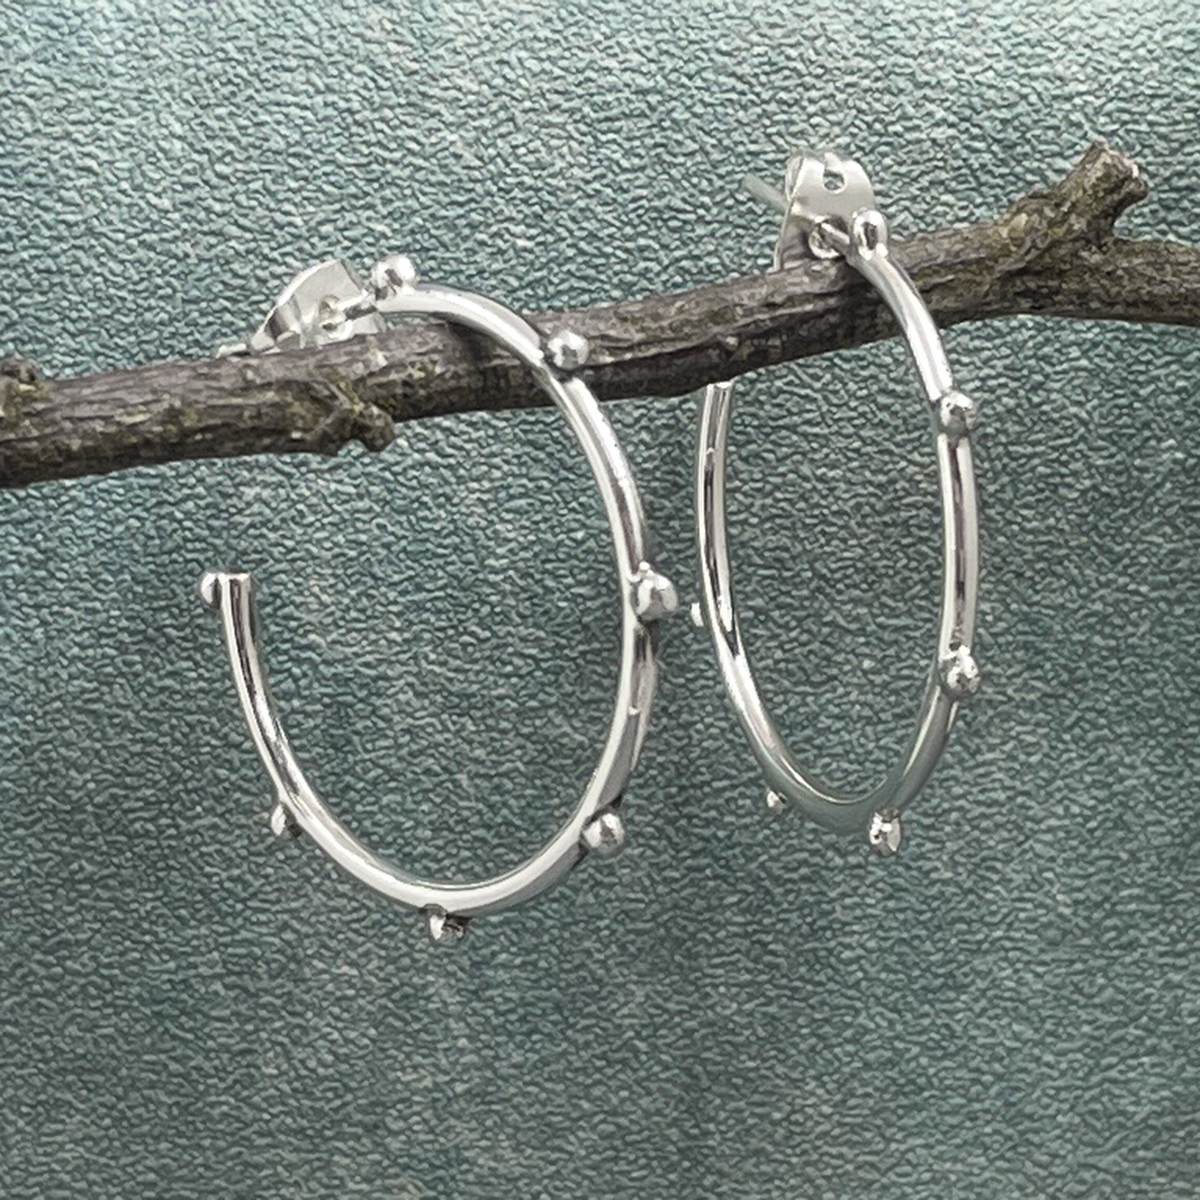 Details:  Diameter: 24 mm (1 15/16 inches) Thickness: 3 mm (1/8 inches) Material: .925 sterling silver Finish: High polished silver Post Type: Sterling silver friction post These elegant hoop earrings feature a stylish dot design, crafted with precision from high-quality sterling silver. The high polished finish adds a touch of sophistication, making them perfect for any occasion.